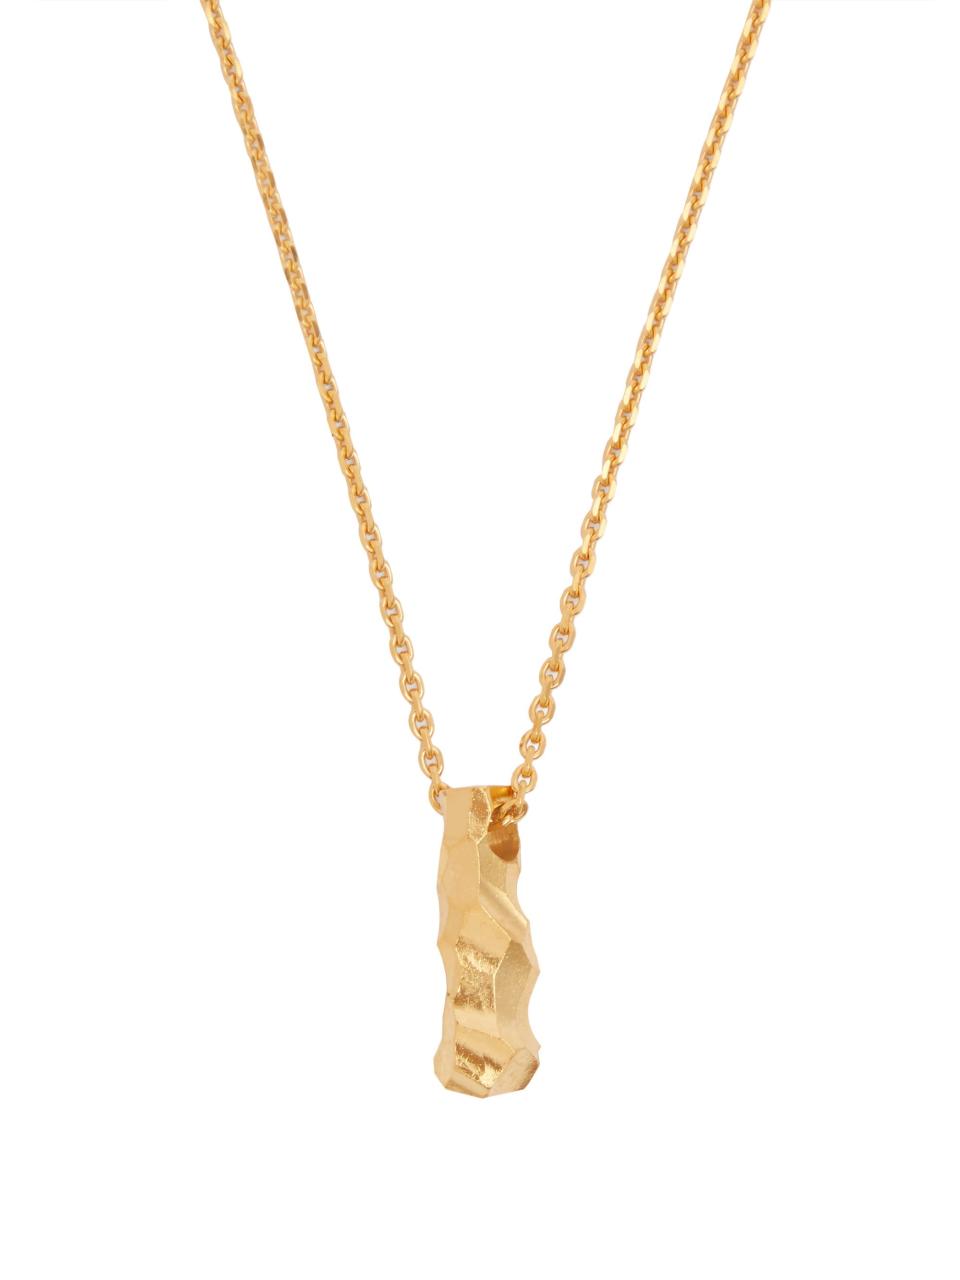 All Blues gold-plated necklace (£250)